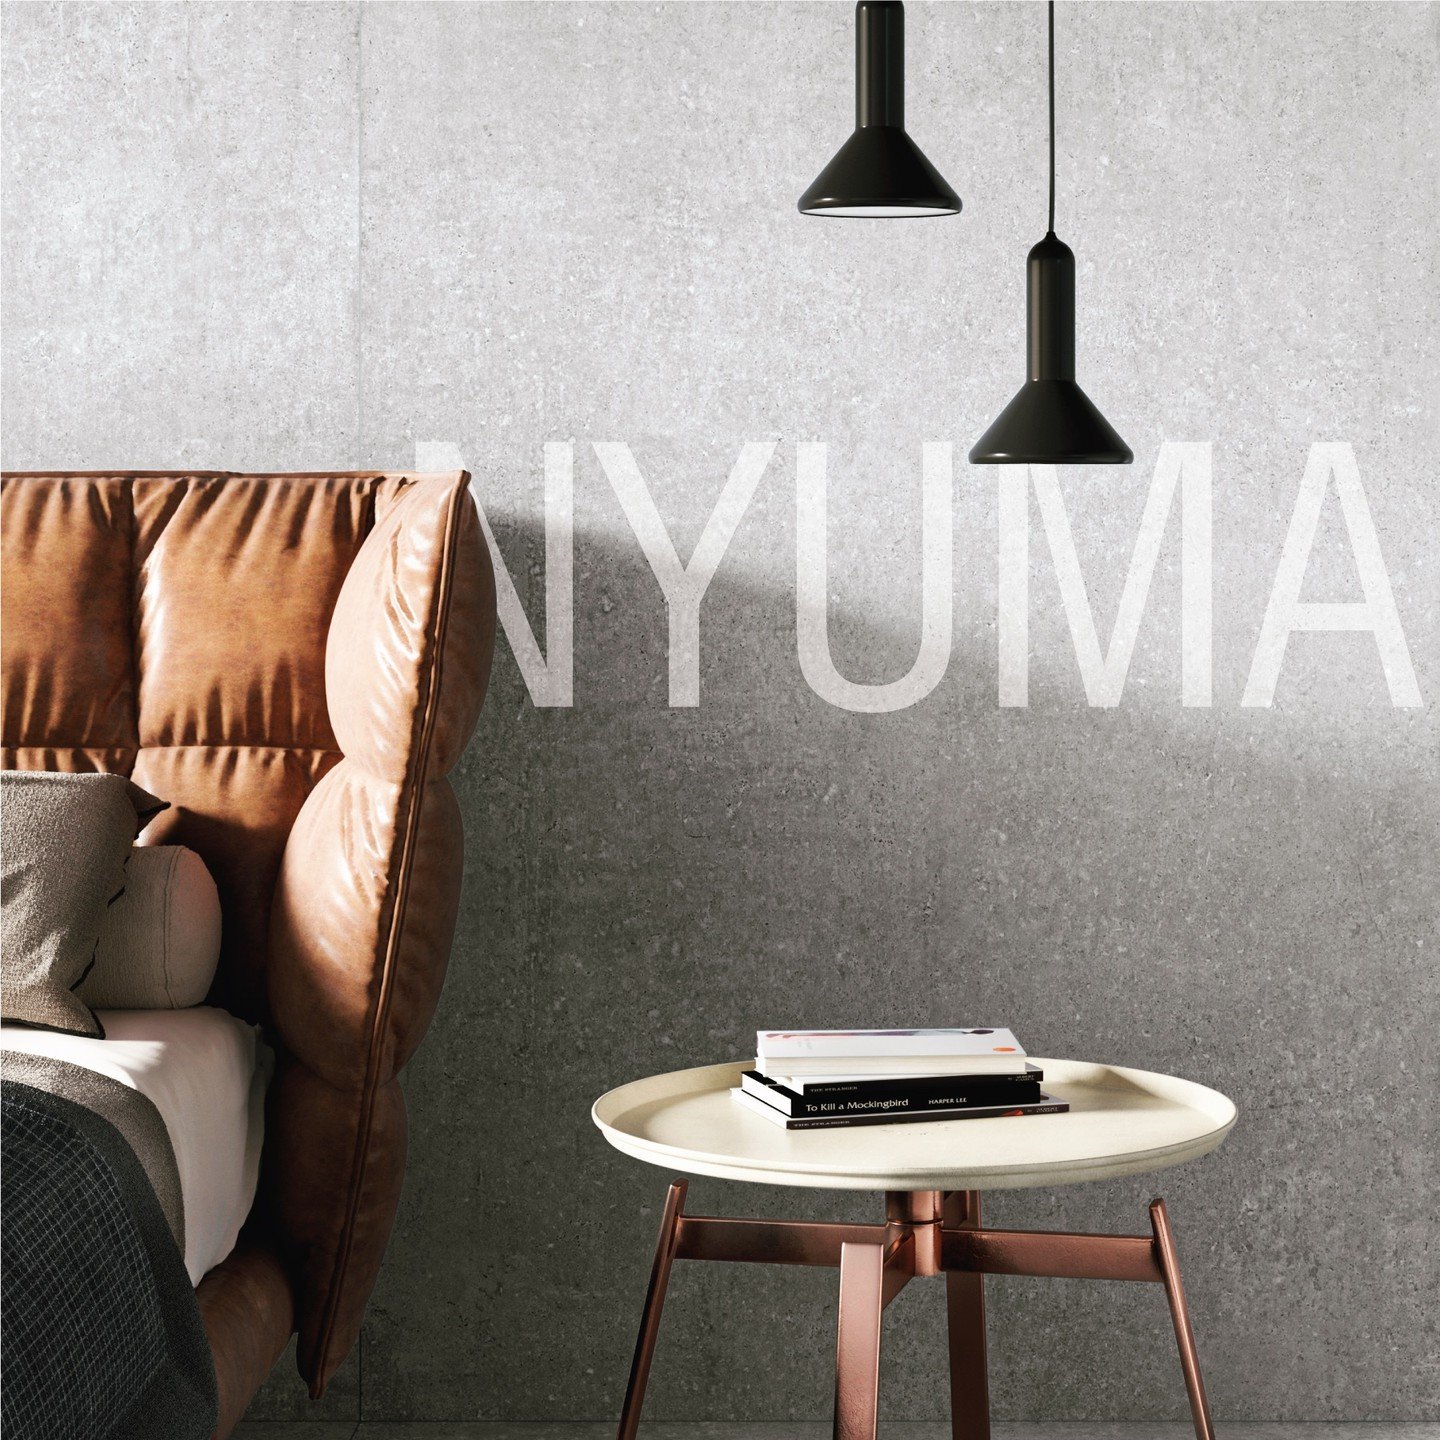 Nyuma porcelain tile from Italy reinterprets the composition of the classic concrete casting, inspired by the aesthetics of the the formwork.
Available at Julian Tile in 6 colors and 2 sizes &ndash; 24&rdquo; x 24&rdquo; and 12&rdquo; x 24&rdquo;
#in